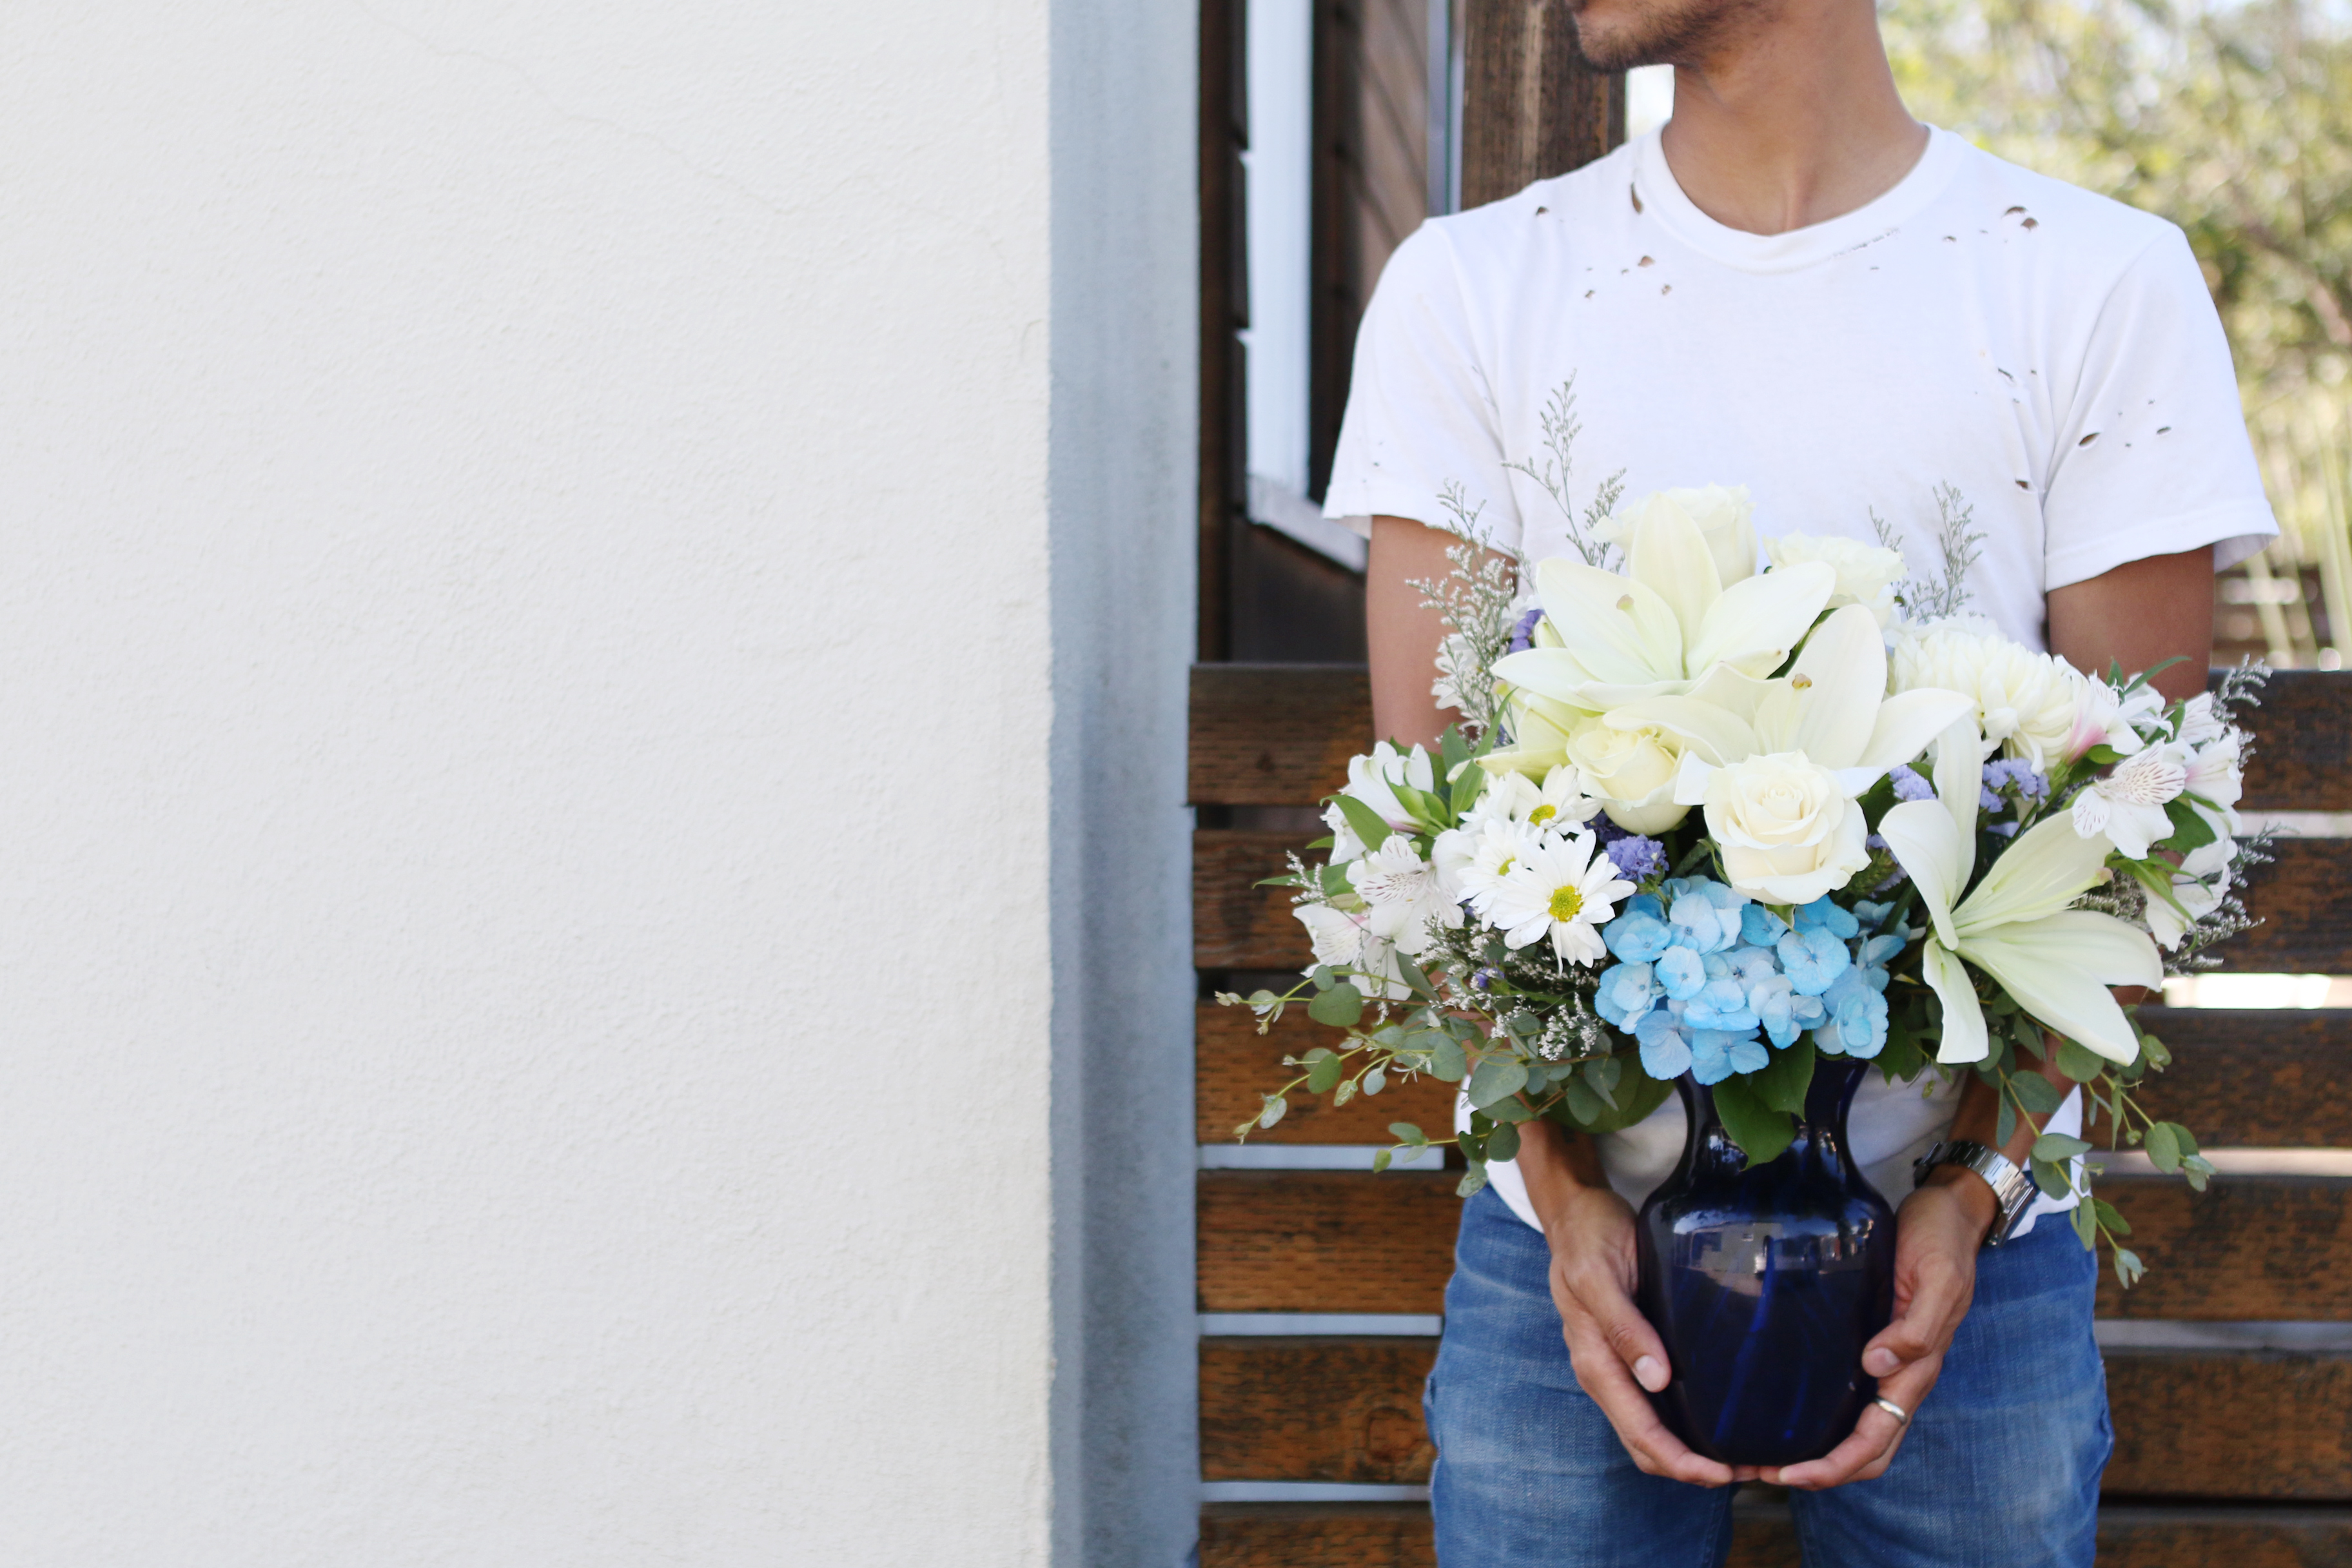 white lilies, blue hydrangea, and greenery in blue vase